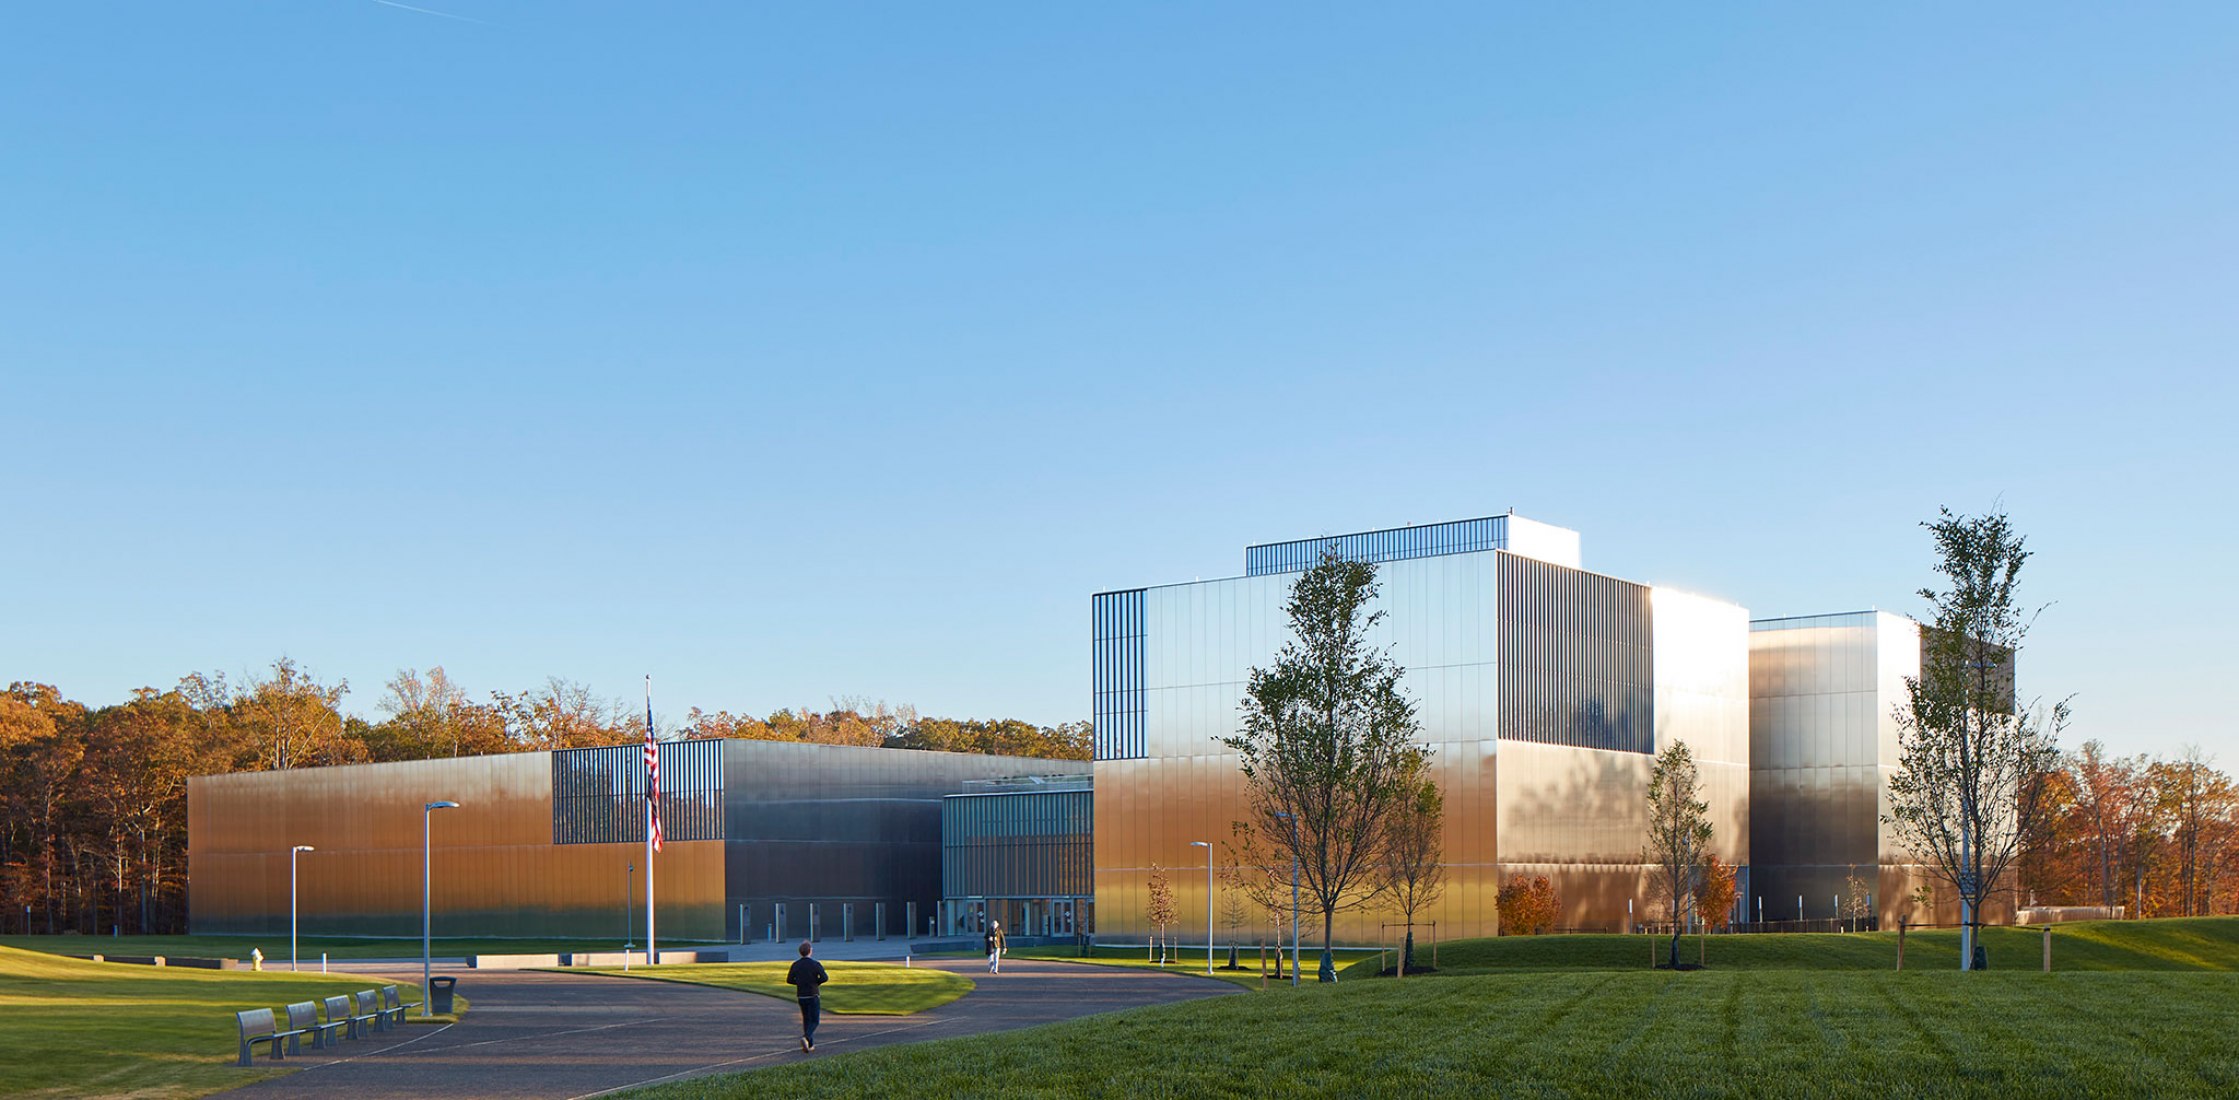 National Museum of the United States Army by SOM. Photograph by Dave Burk, SOM